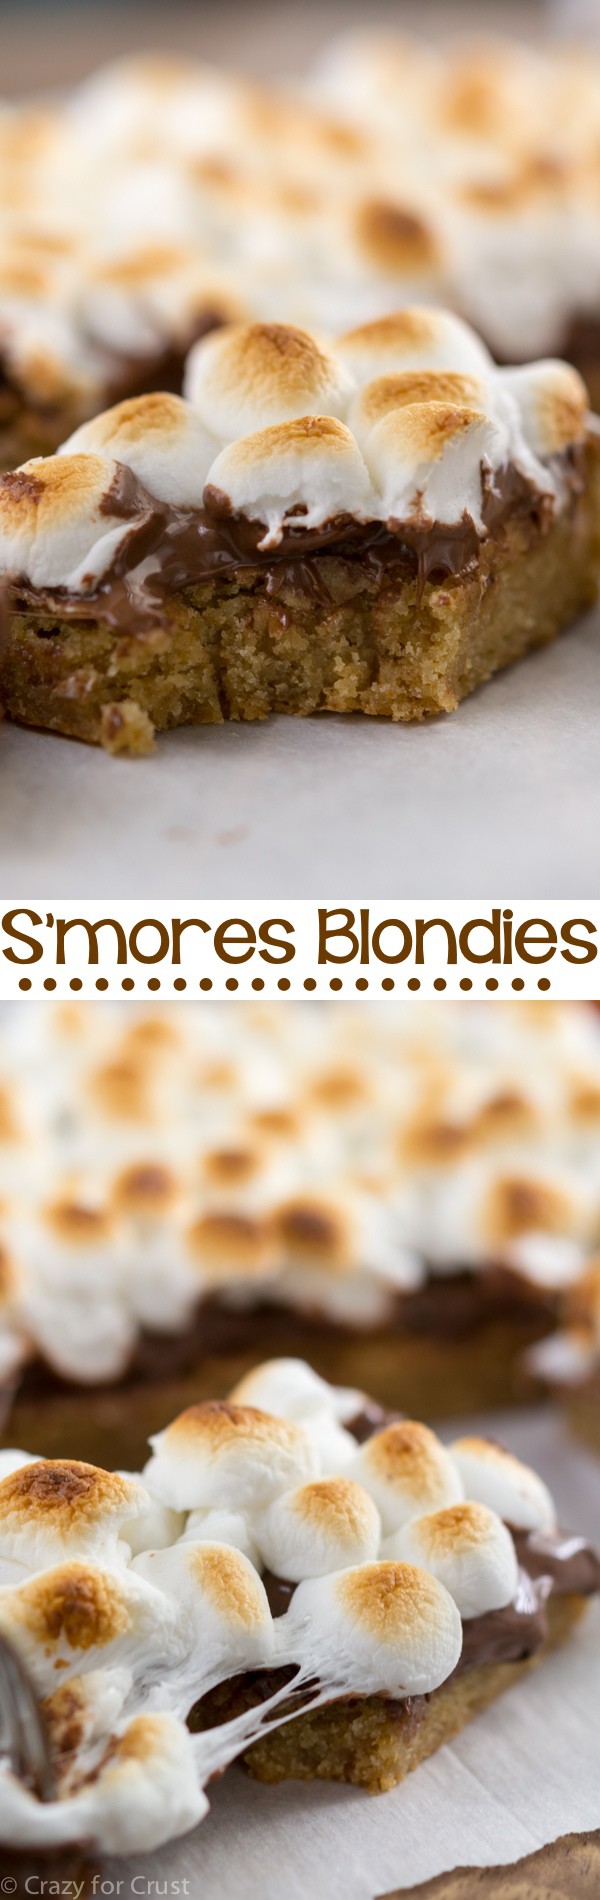 S'more Blondie Bar Recipe - blondie bars topped with Nutella and toasted marshmallows! The BEST indoor s'mores!